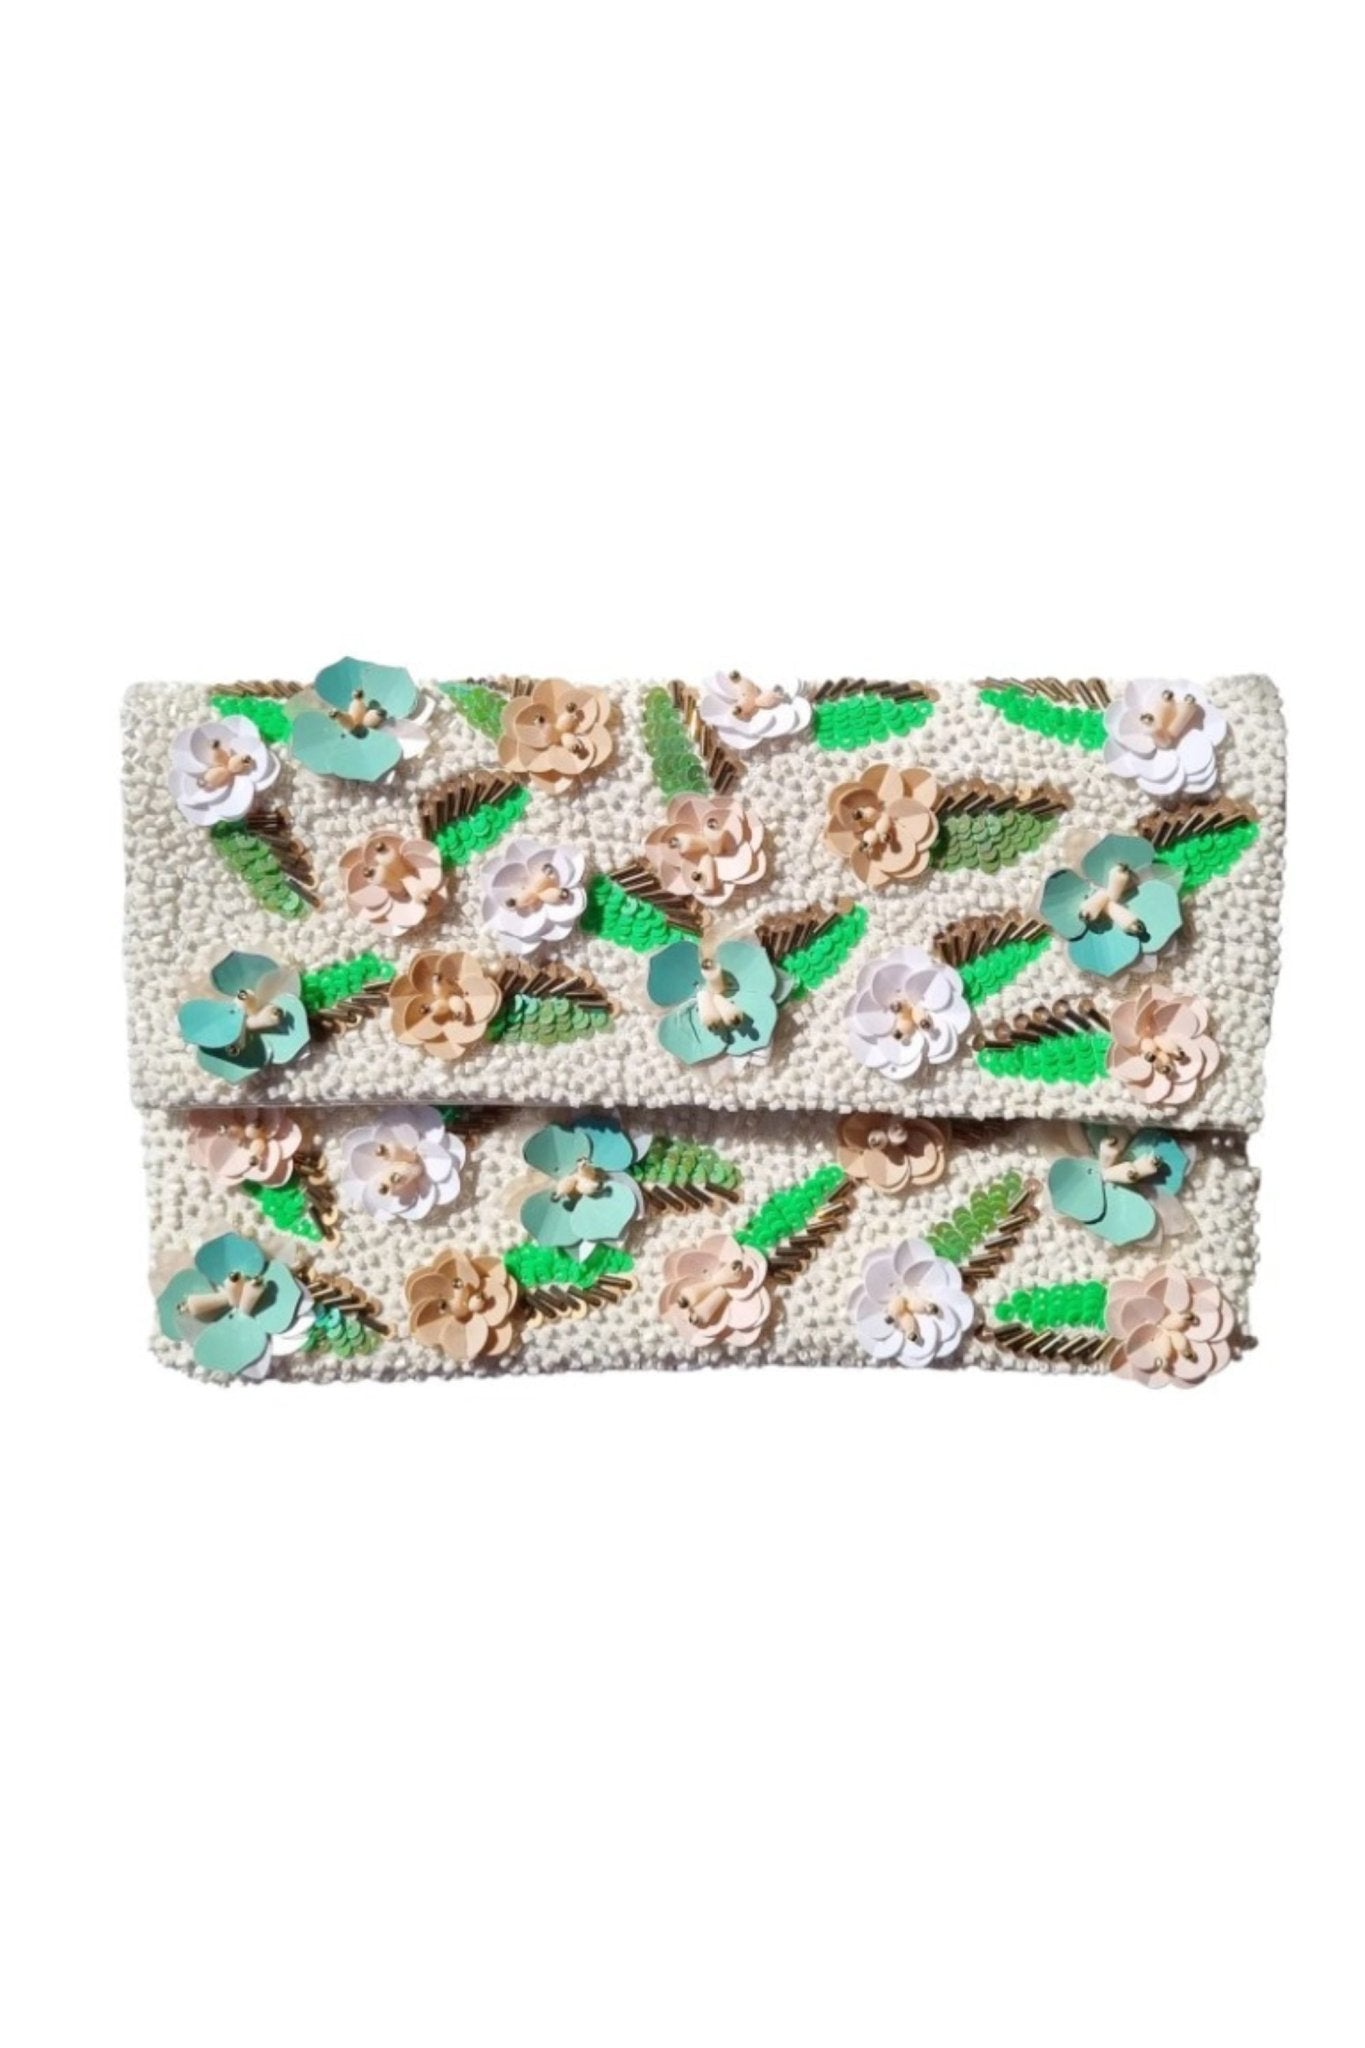 FLORAL BEADED CLUTCH - BAG1